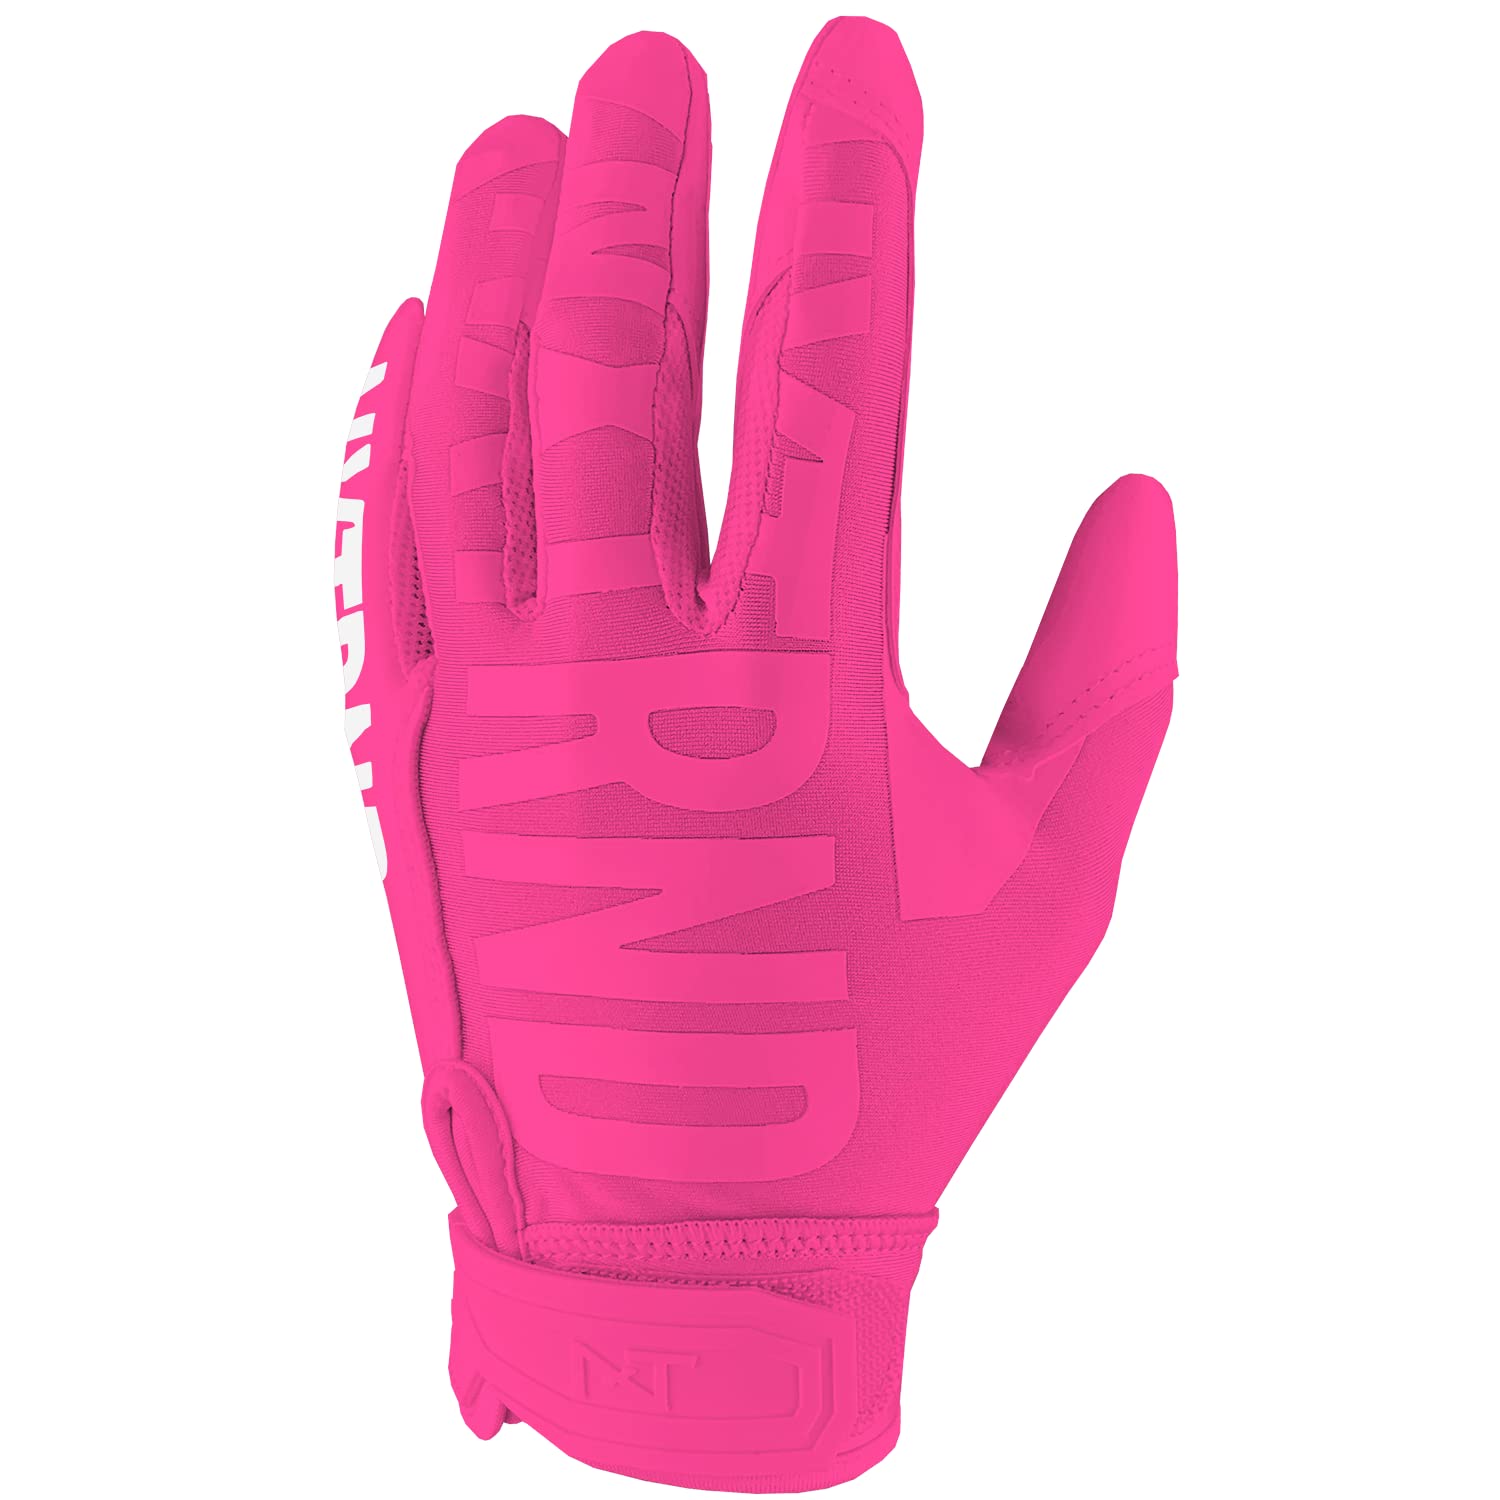 NXT NXTRND Nxtrnd g1 Pro Football gloves, Mens & Youth Boys Sticky Receiver gloves (Pink, Small)